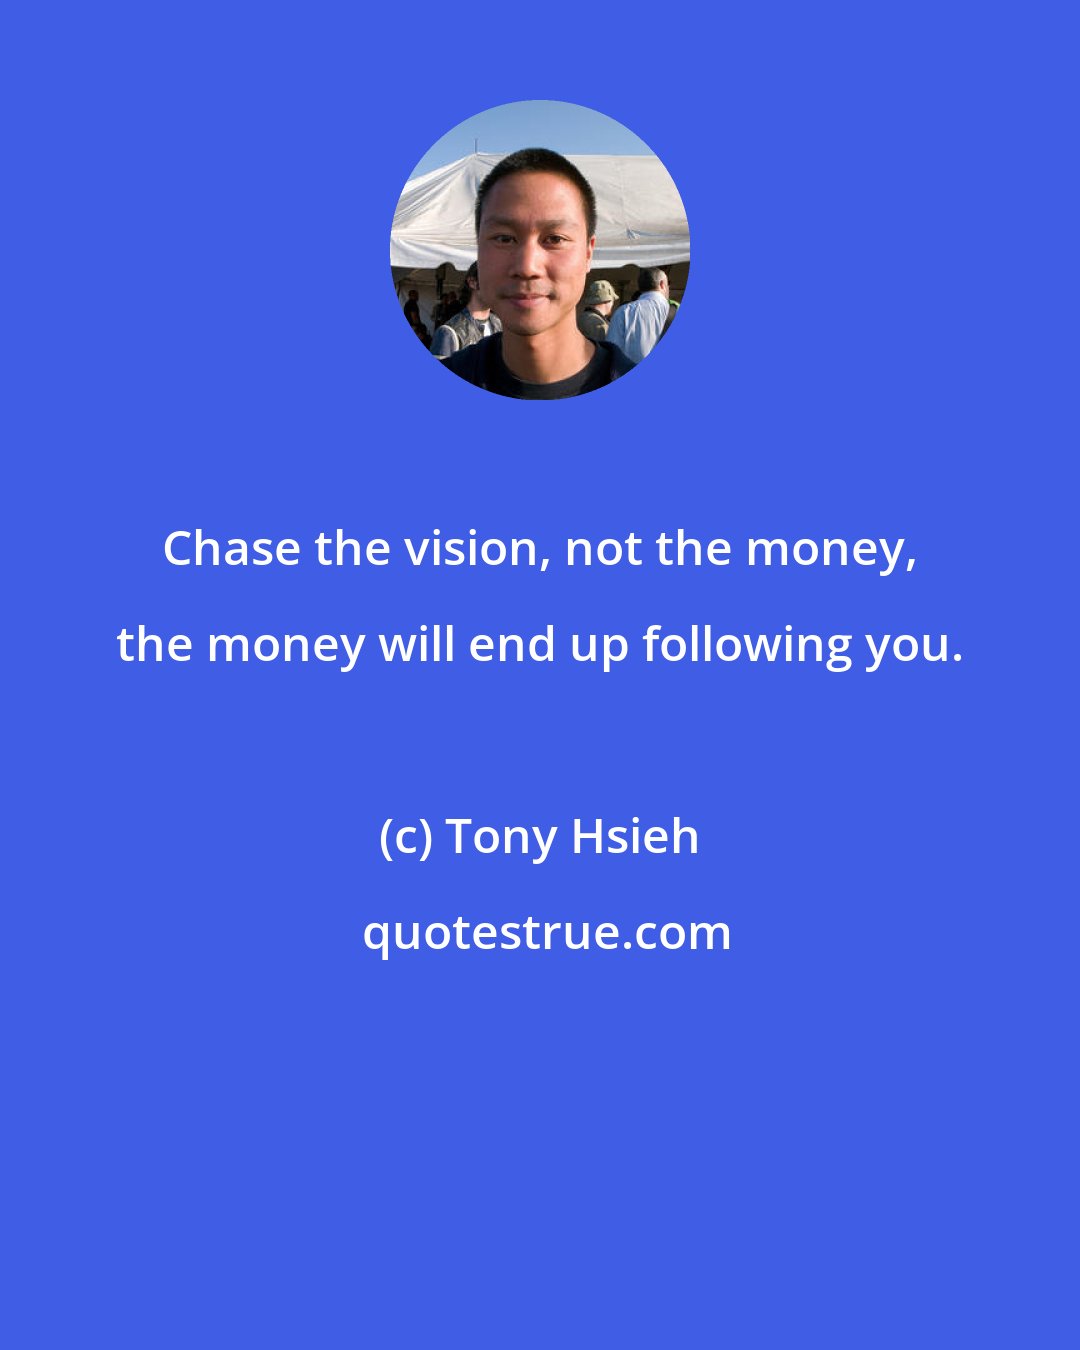 Tony Hsieh: Chase the vision, not the money, the money will end up following you.